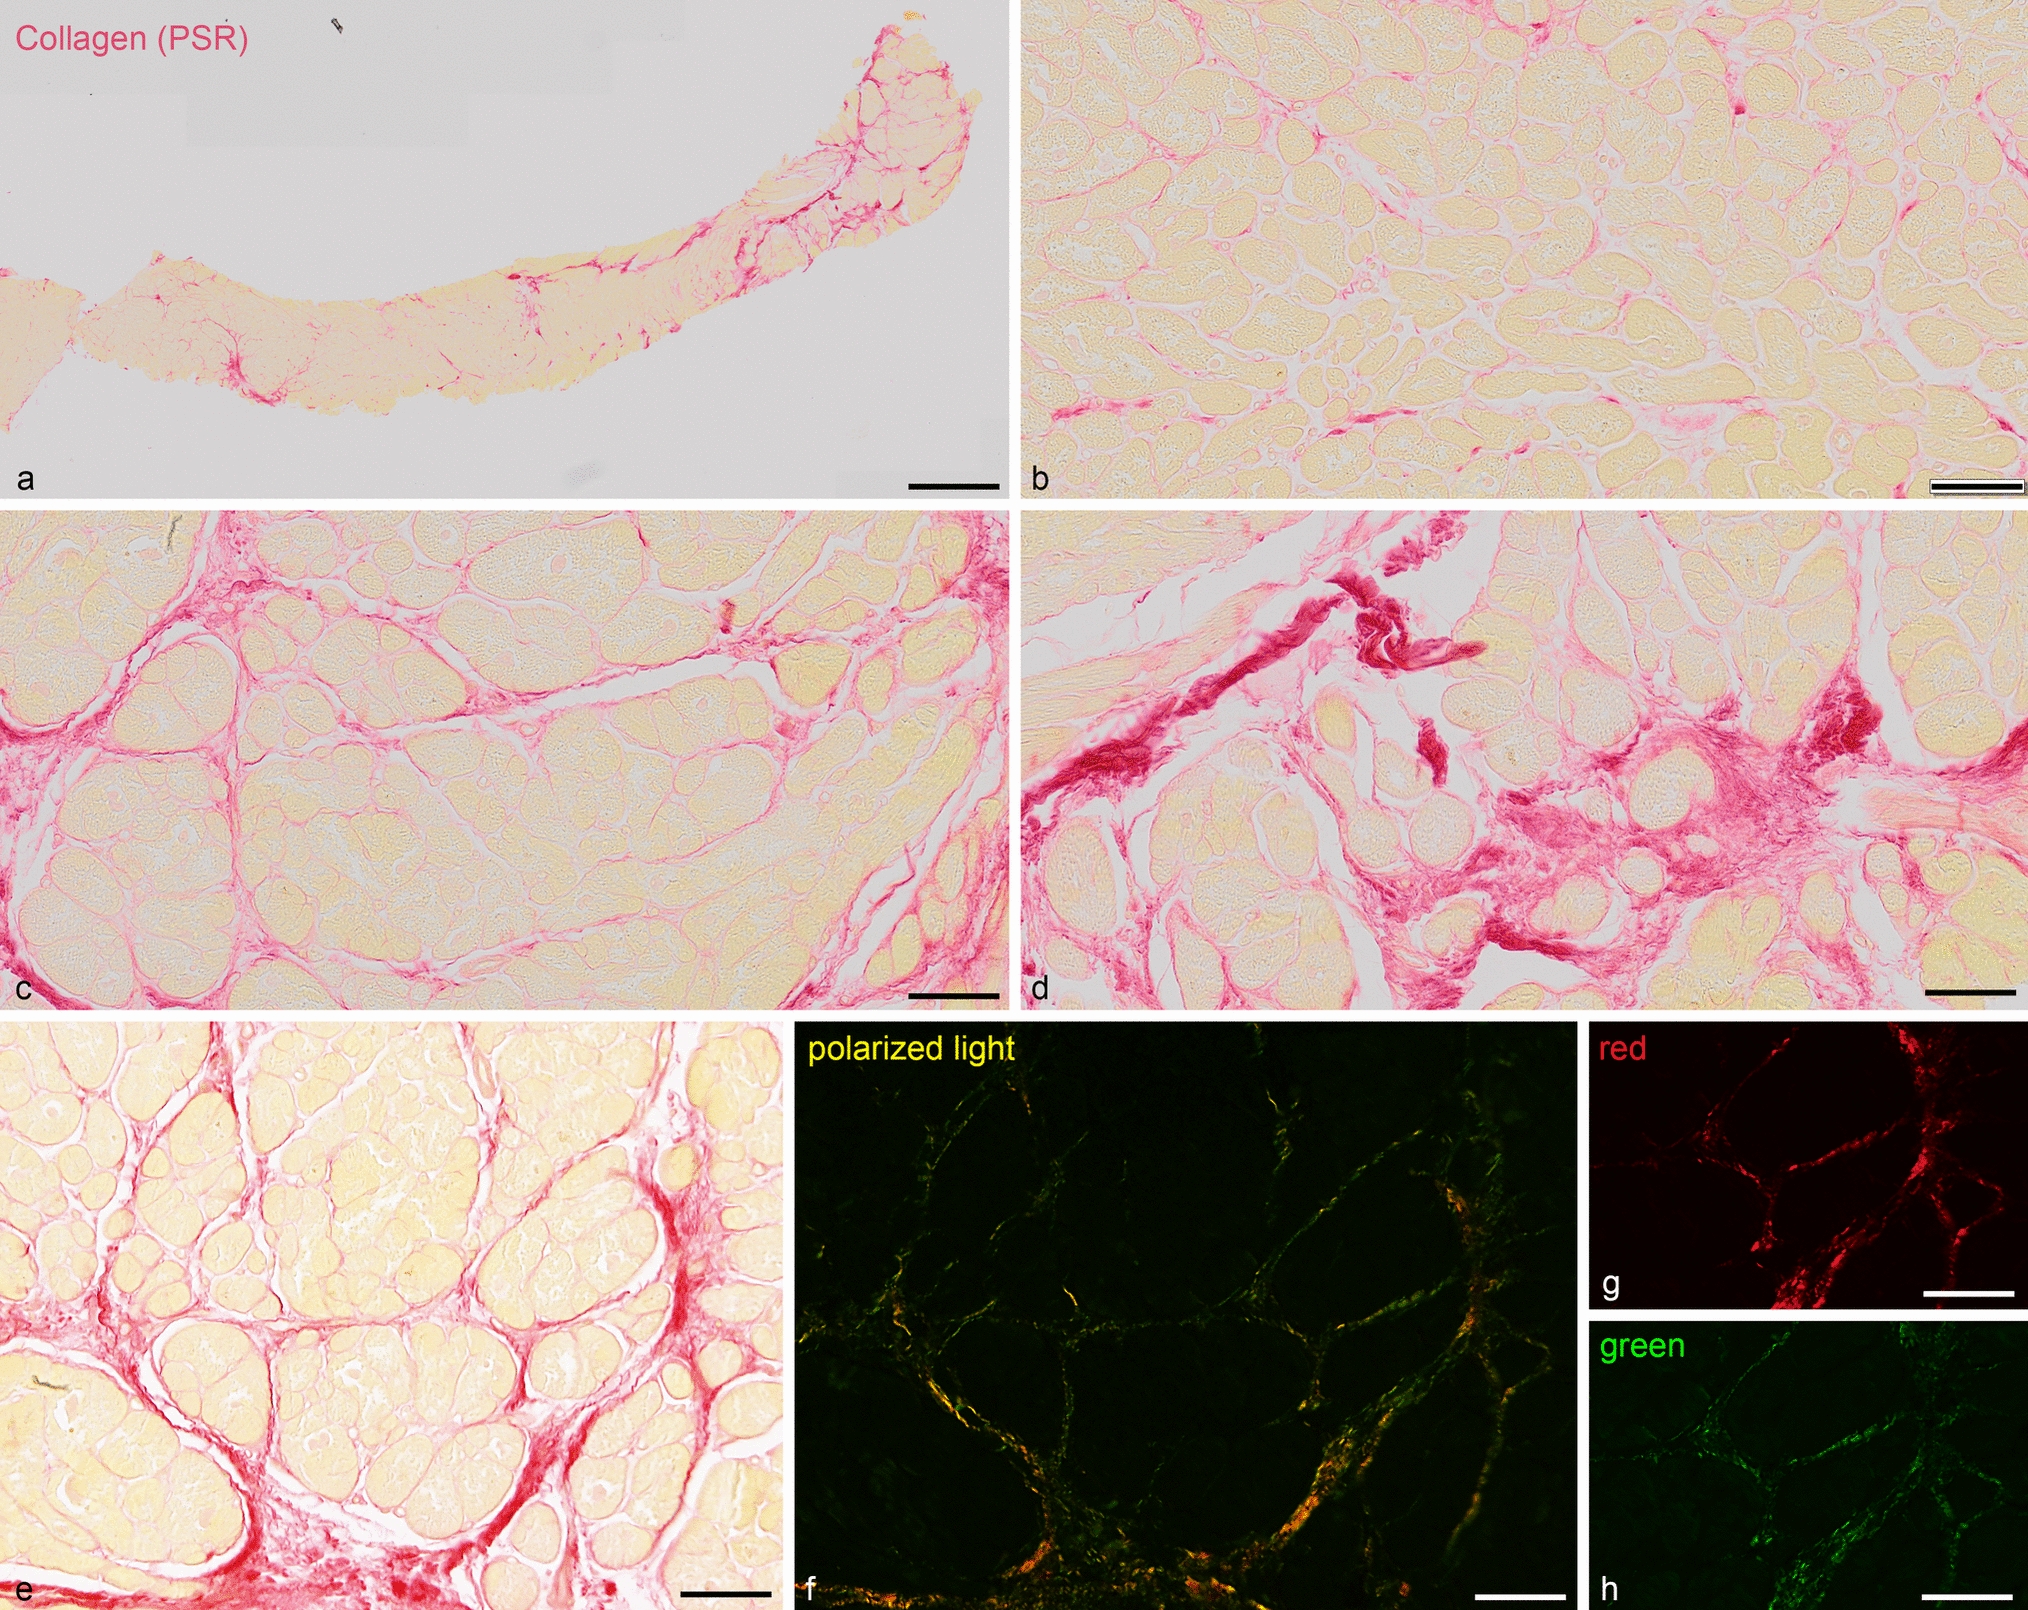 Fibrosis and expression of extracellular matrix proteins in human interventricular septum in aortic valve stenosis and regurgitation